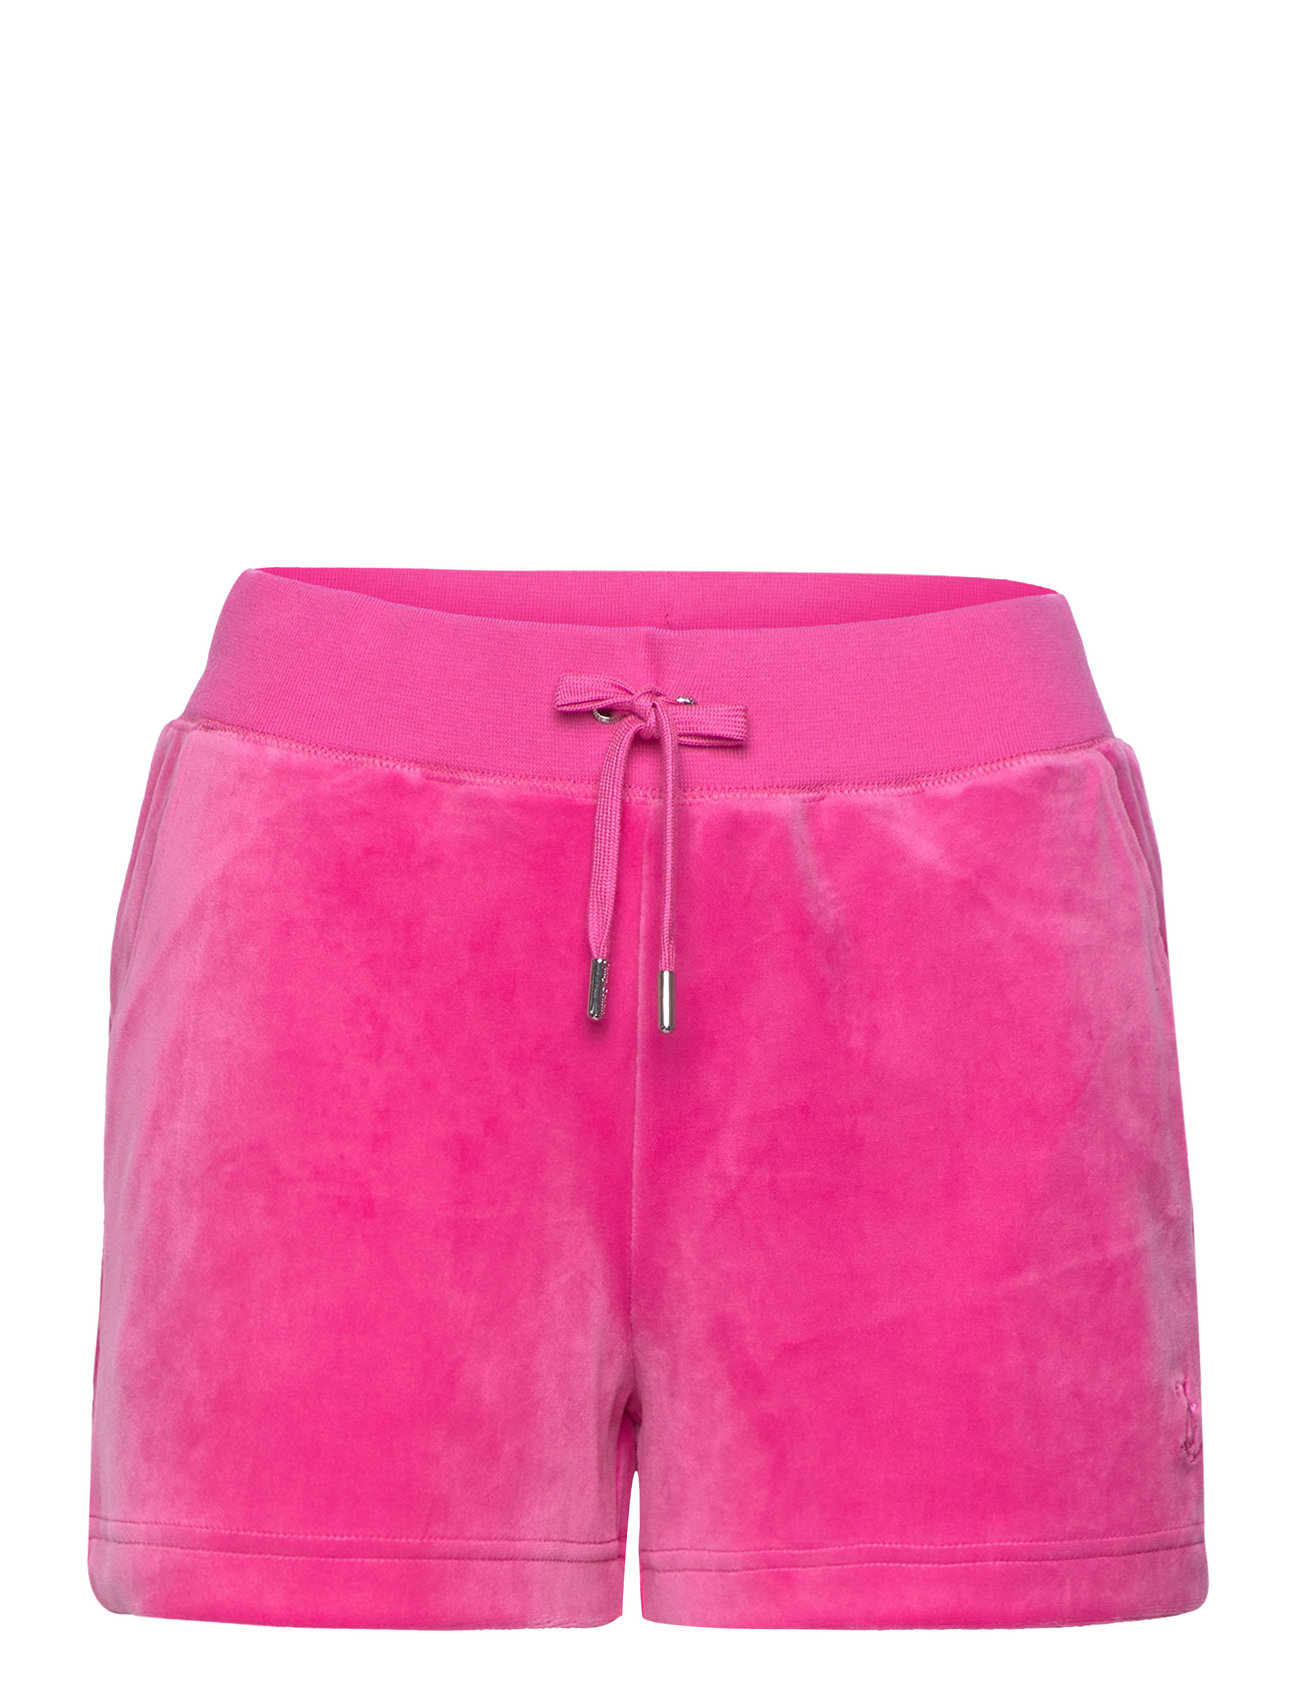 Eve - Classic Bottoms Shorts Casual Shorts Pink Juicy Couture